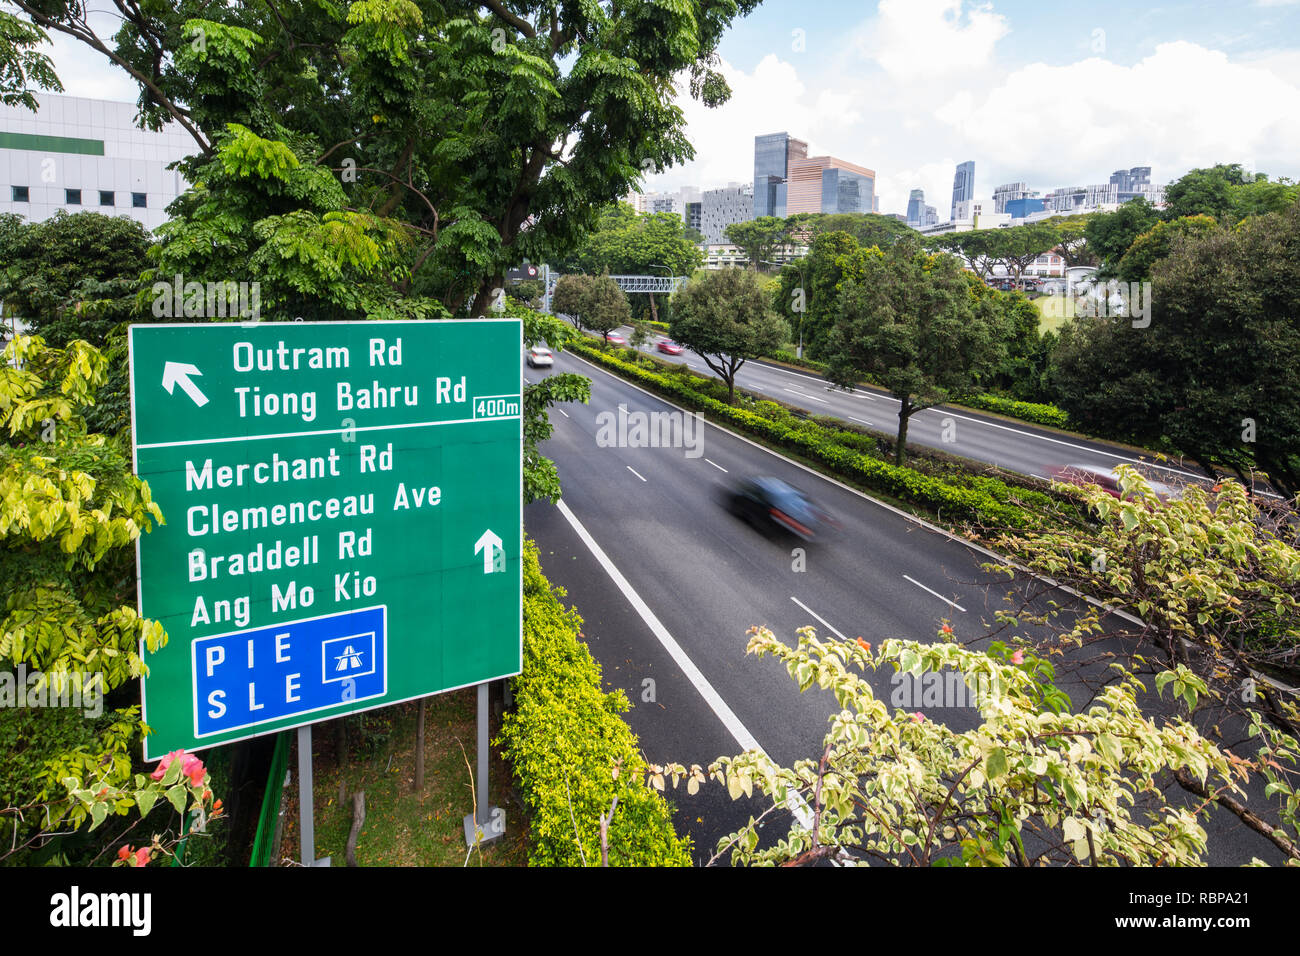 A huge road sign showing directions on the expressways in Singapore. Stock Photo